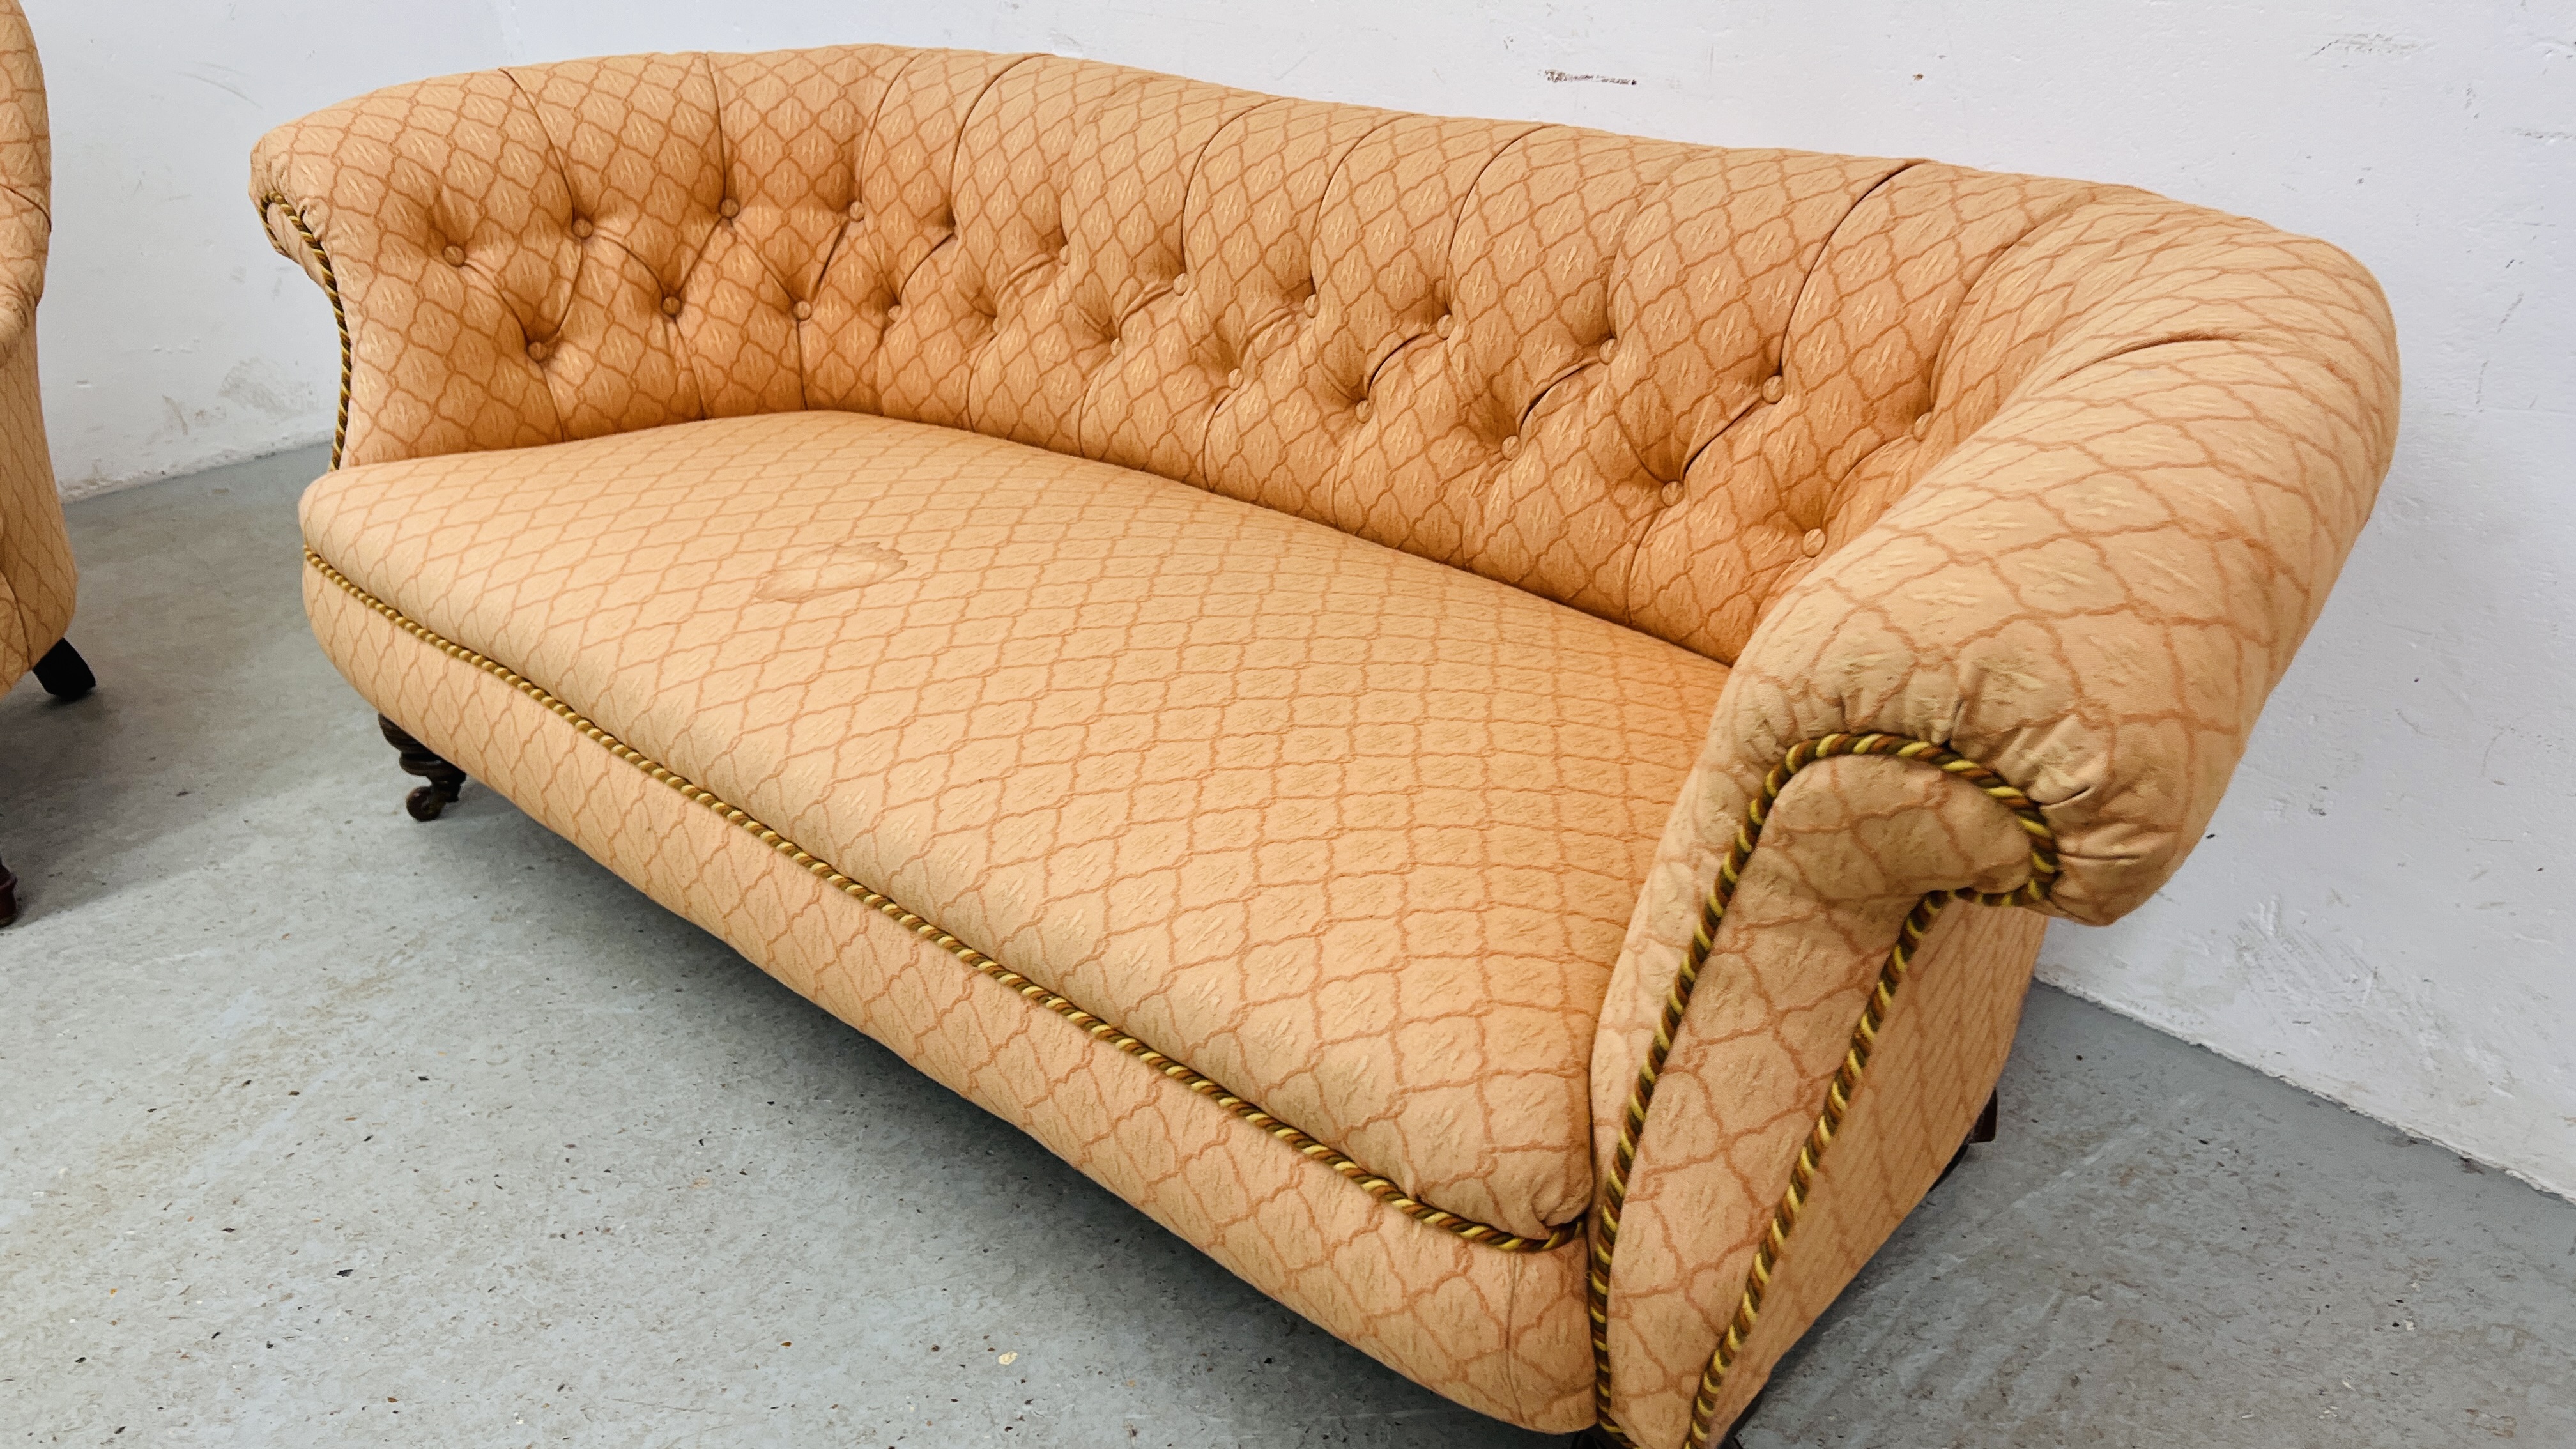 A VICTORIAN BUTTON BACK SOFA AND A LADY'S ARMCHAIR COVERED IN A SIMILAR FABRIC. - Image 7 of 11